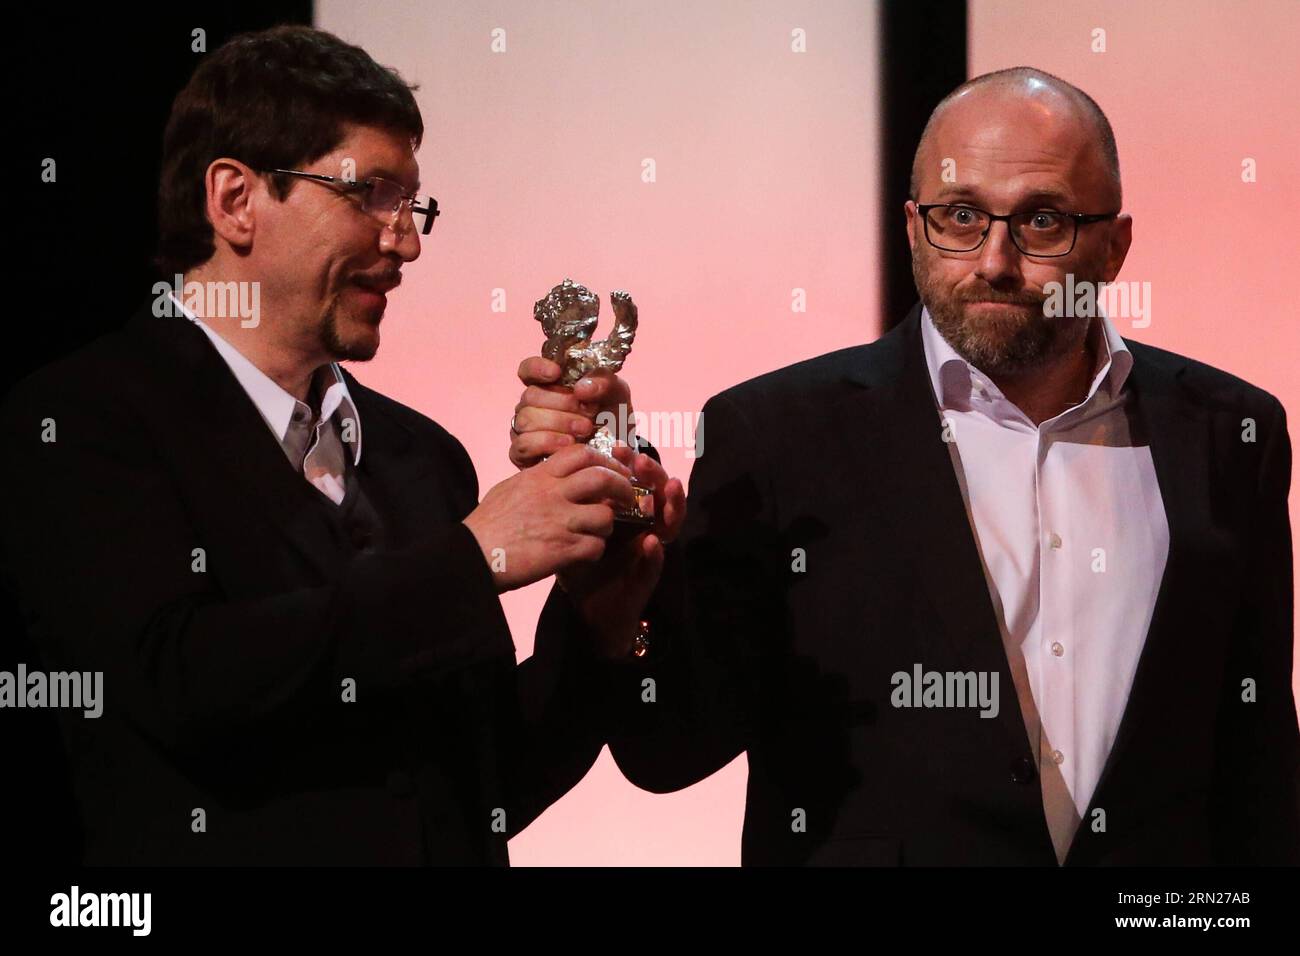 ENTERTAINMENT RED CARPET 65. Berlinale - Preisverleihung (150214) -- BERLIN, Feb. 14, 2015 -- Evgeniy Privin (R) and Sergey Mikhalchuk hold the Silver Bear for an Outstanding Artistic Contribution for the camera for the film Under Electric Clouds during the award ceremony at the 65th Berlinale International Film Festival in Berlin, Germany, Feb. 14, 2015. ) GERMANY-BERLIN-INTERNATIONAL FILM FESTIVAL ZhangxFan PUBLICATIONxNOTxINxCHN   Entertainment Red Carpet 65 Berlinale Award ceremony  Berlin Feb 14 2015 Evgeniy  r and Sergey Mikhalchuk Hold The Silver Bear for to Outstanding ARTISTIC Contrib Stock Photo